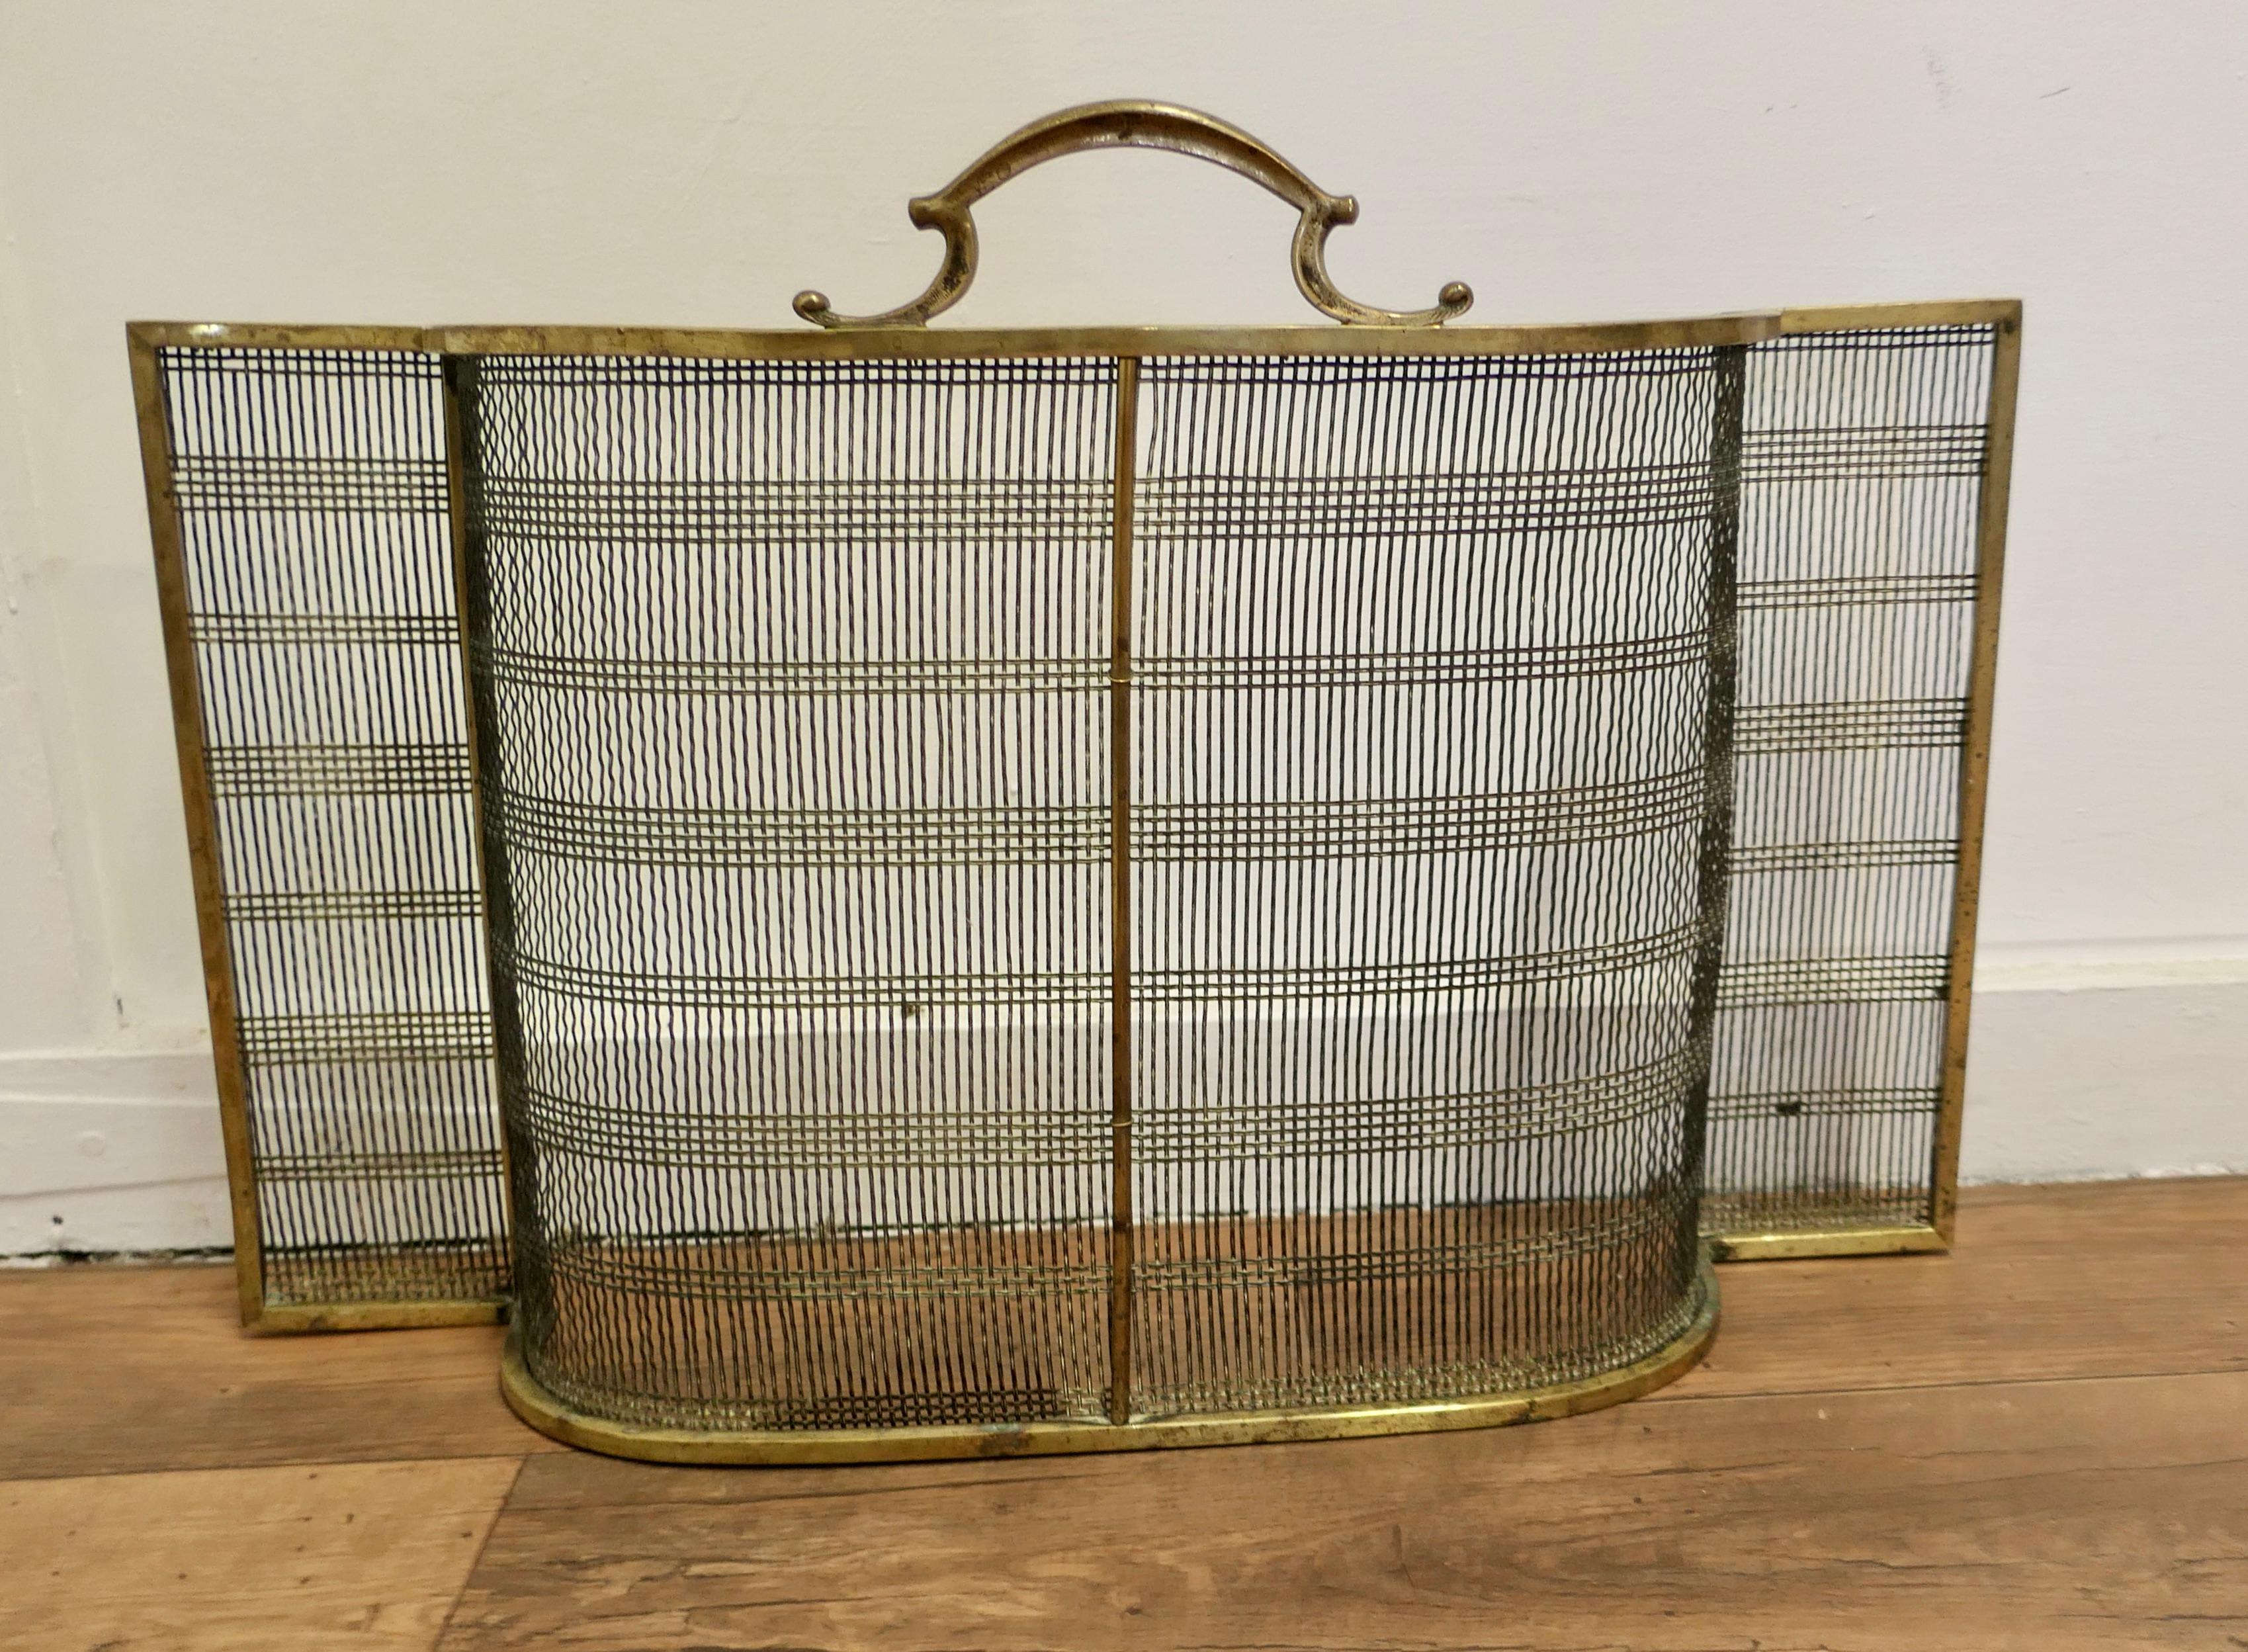 A Victorian Bowed Brass Nursery Fire Guard


A Victorian antique fire guard often known as a nursery guard as it completely surrounds the fire, this one has a bowed centre with straight sides go flat against the fireplace

The guard has a